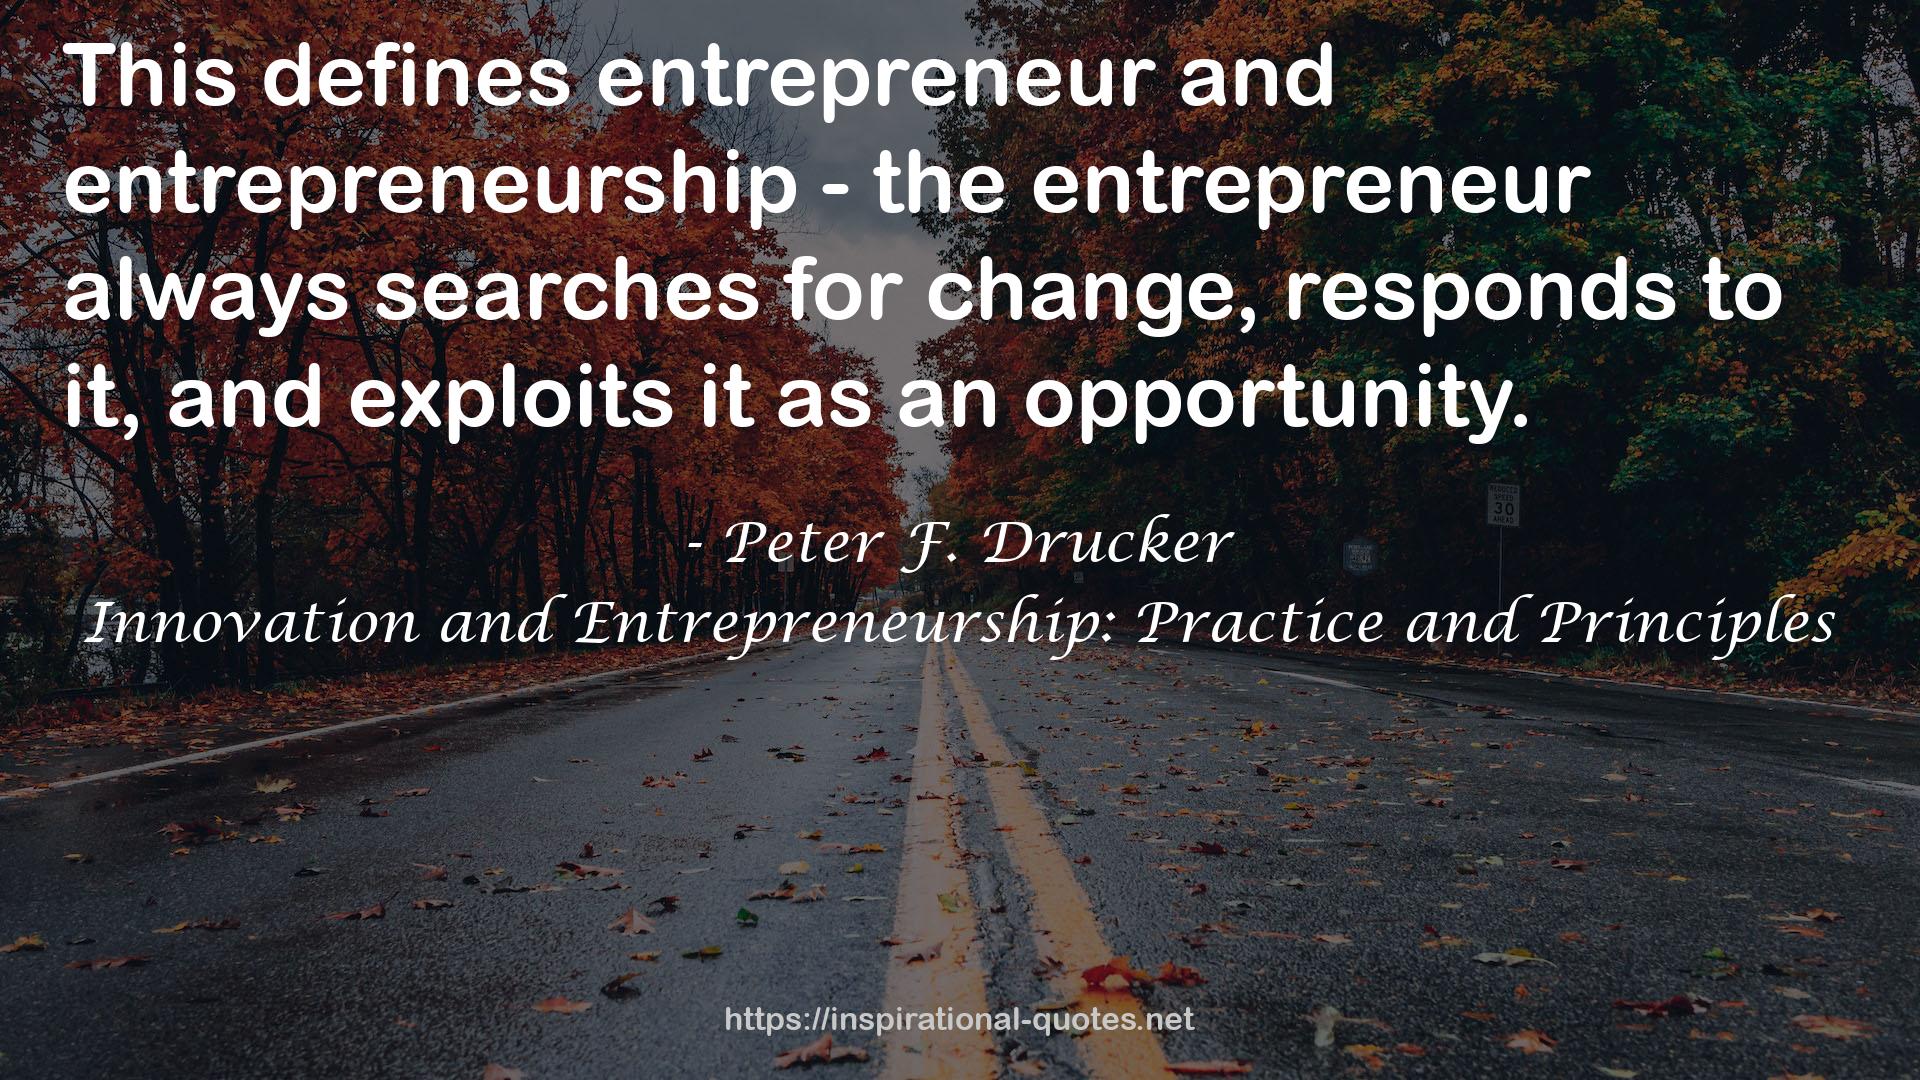 Innovation and Entrepreneurship: Practice and Principles QUOTES